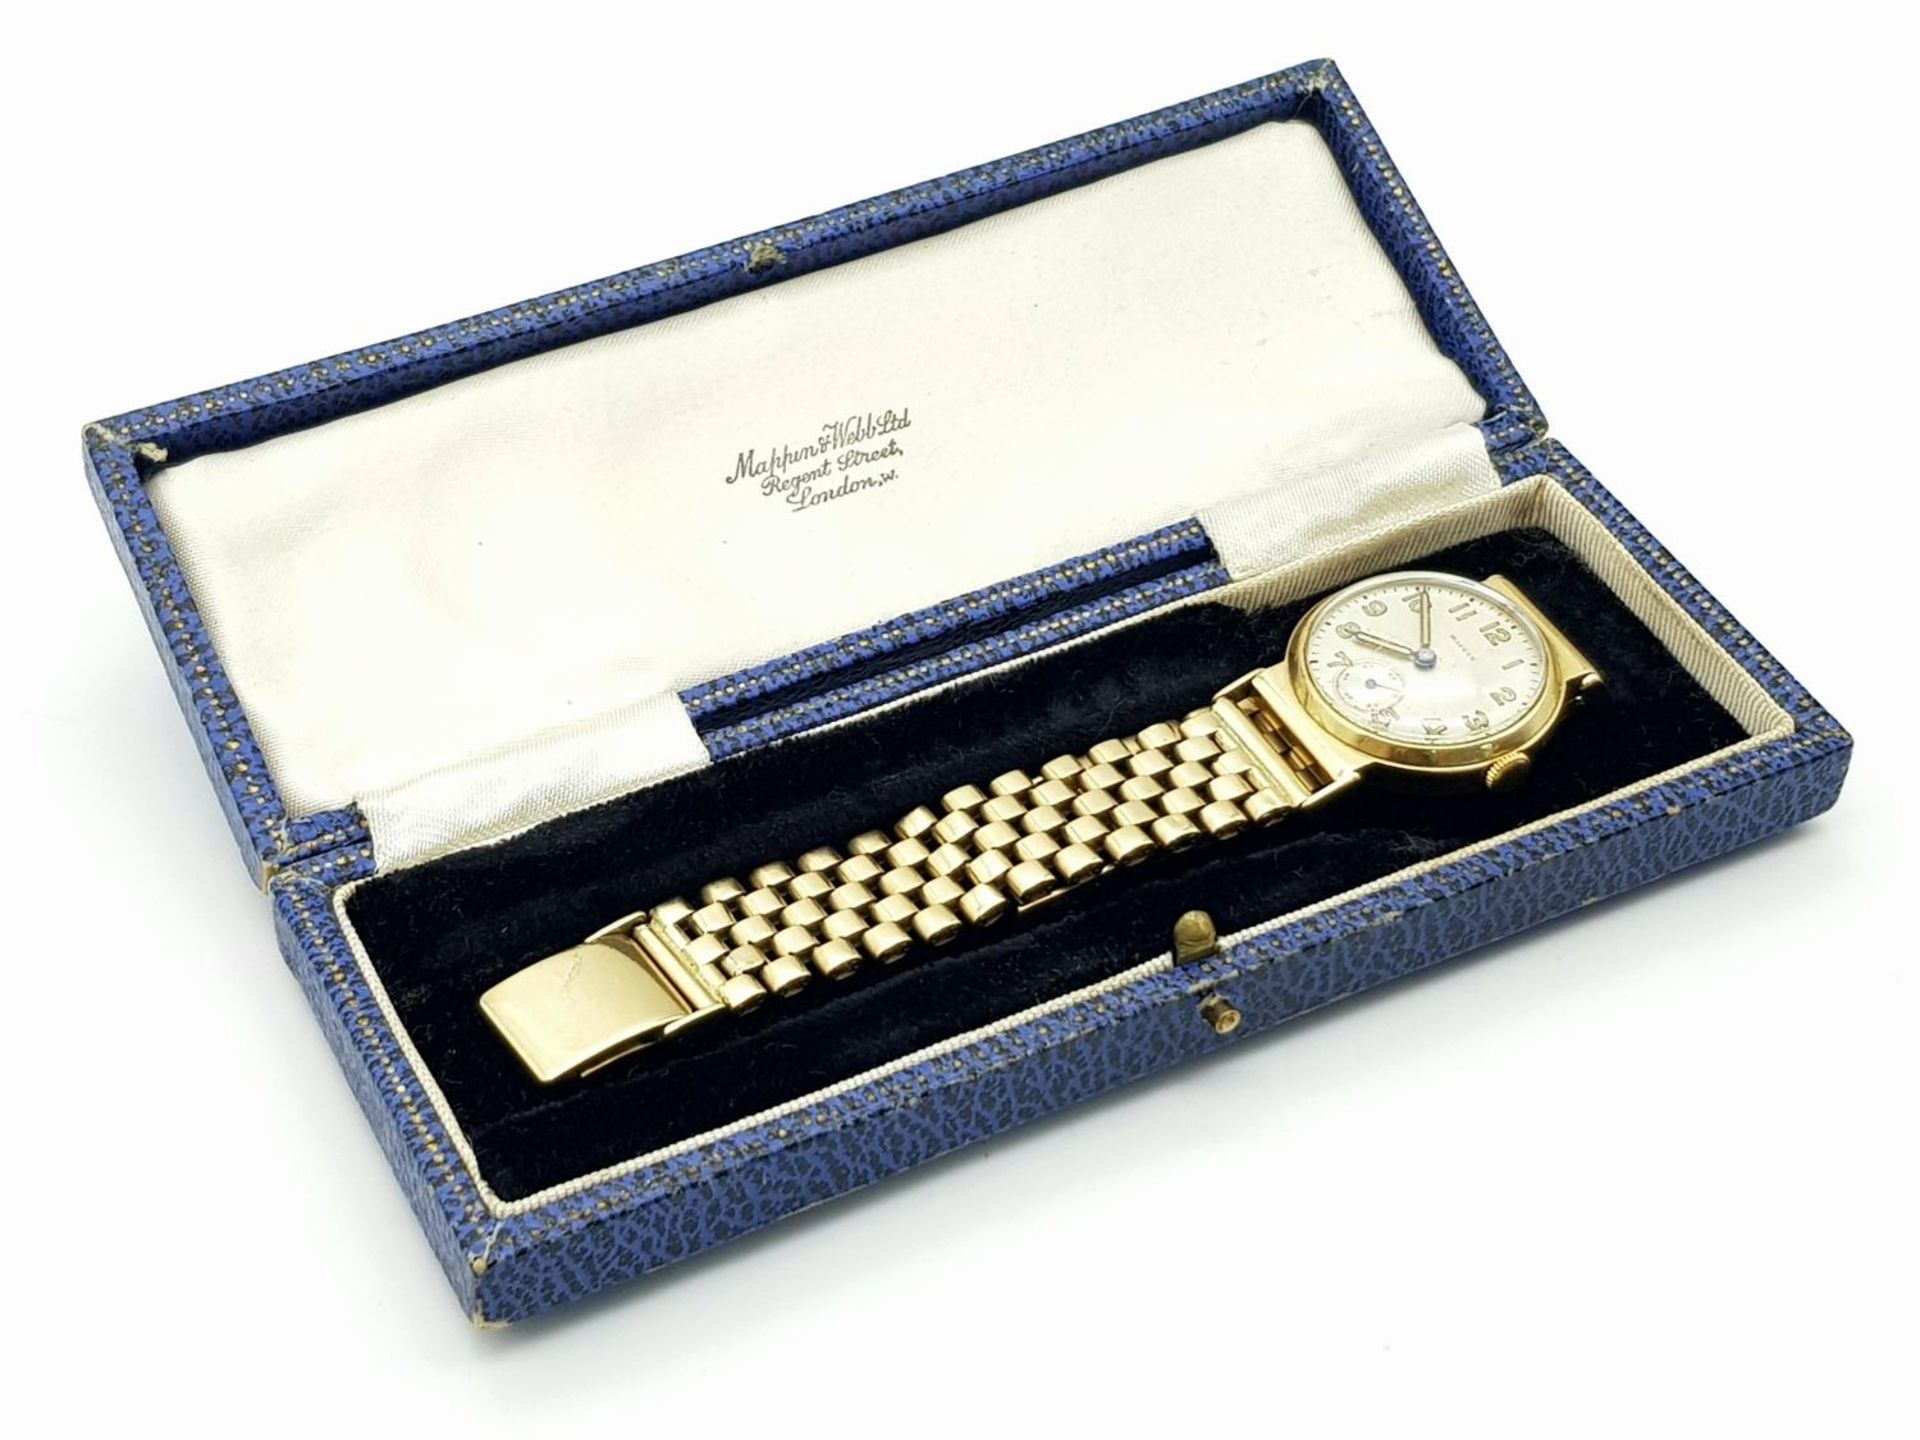 A Vintage (1950s) Mappin and Webb 9K Gold Watch. 9K gold bracelet and case - 28mm. Patinated dial - Image 8 of 9